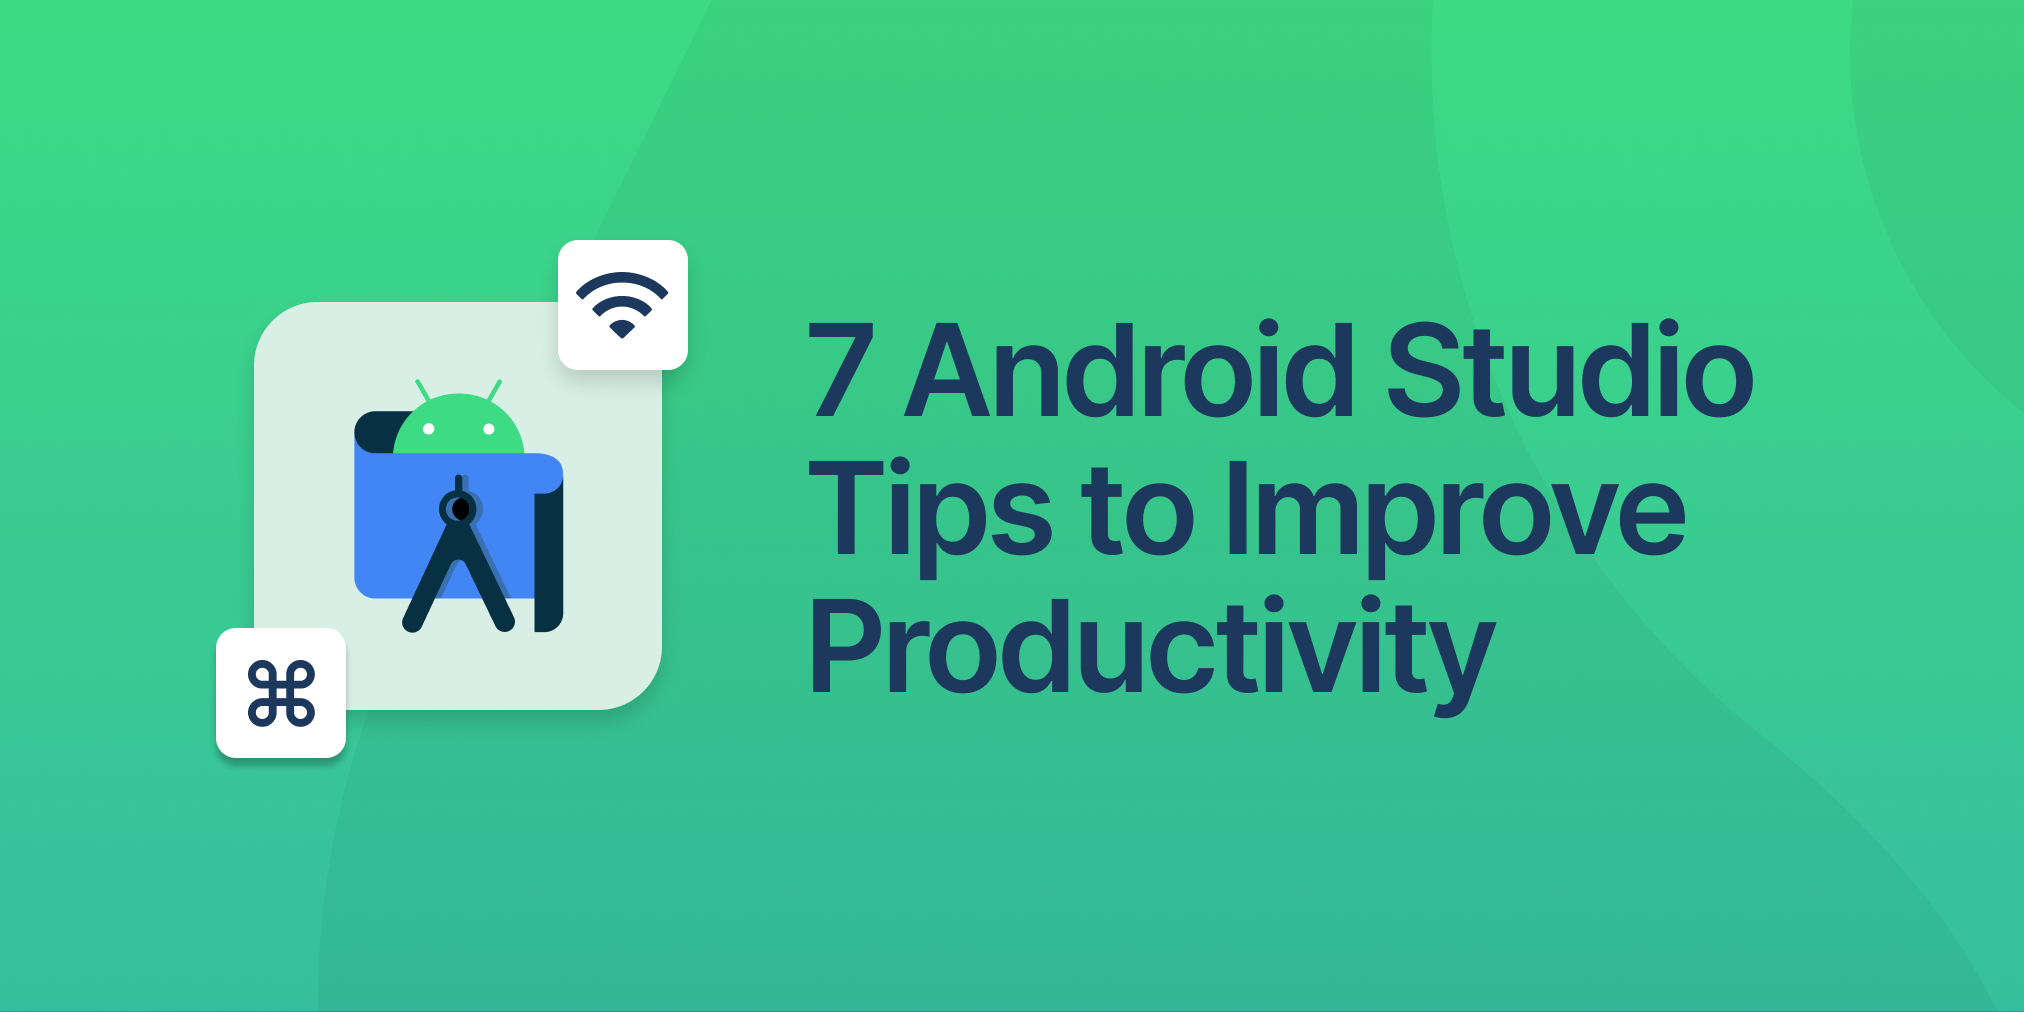 7 Android Studio Tips to Improve Productivity